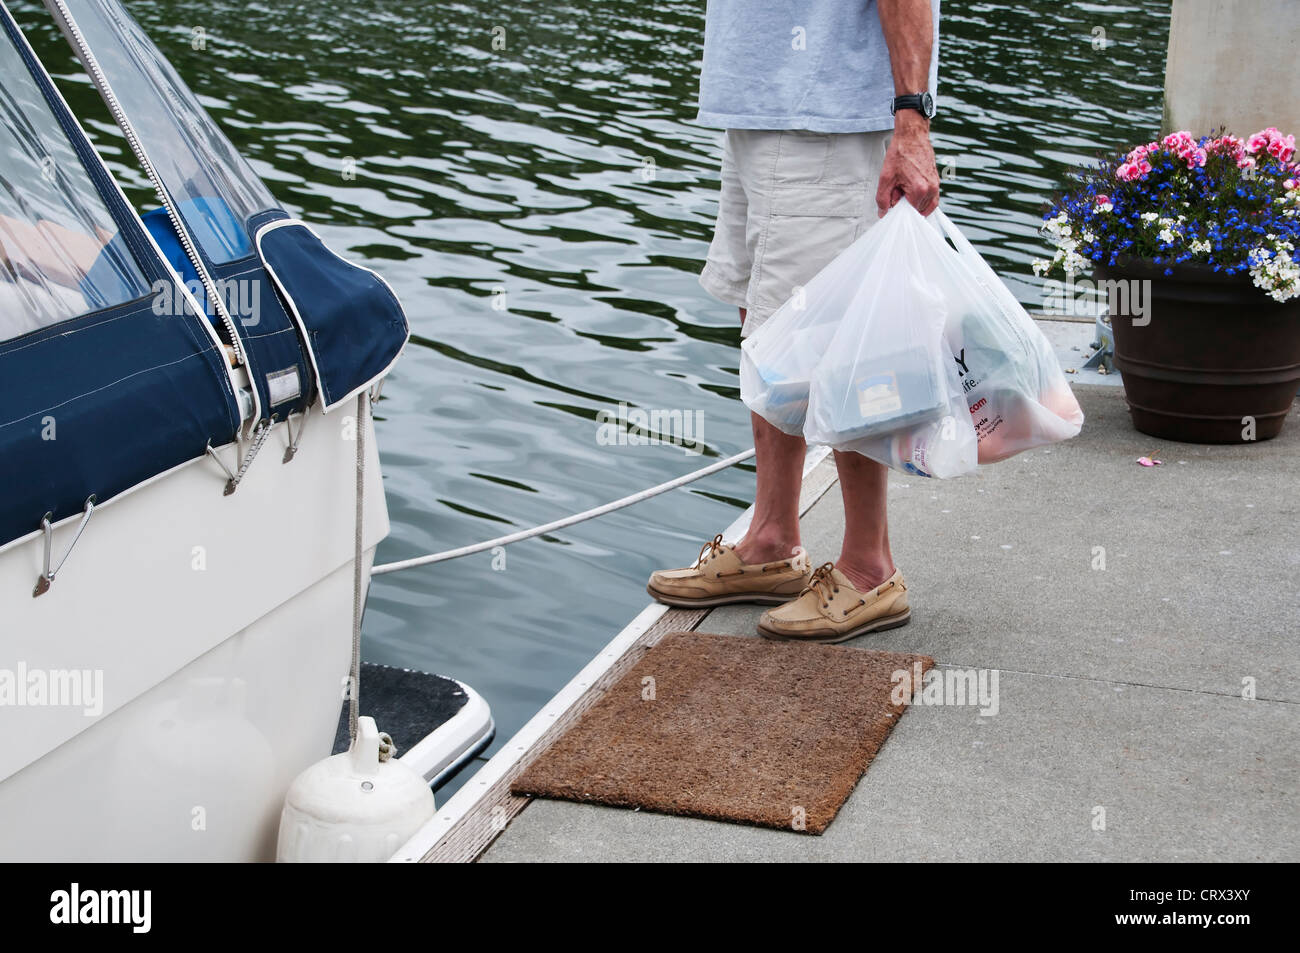 Man stands on marina dock with hands holding full plastic shopping bags filled with provisions. Stock Photo